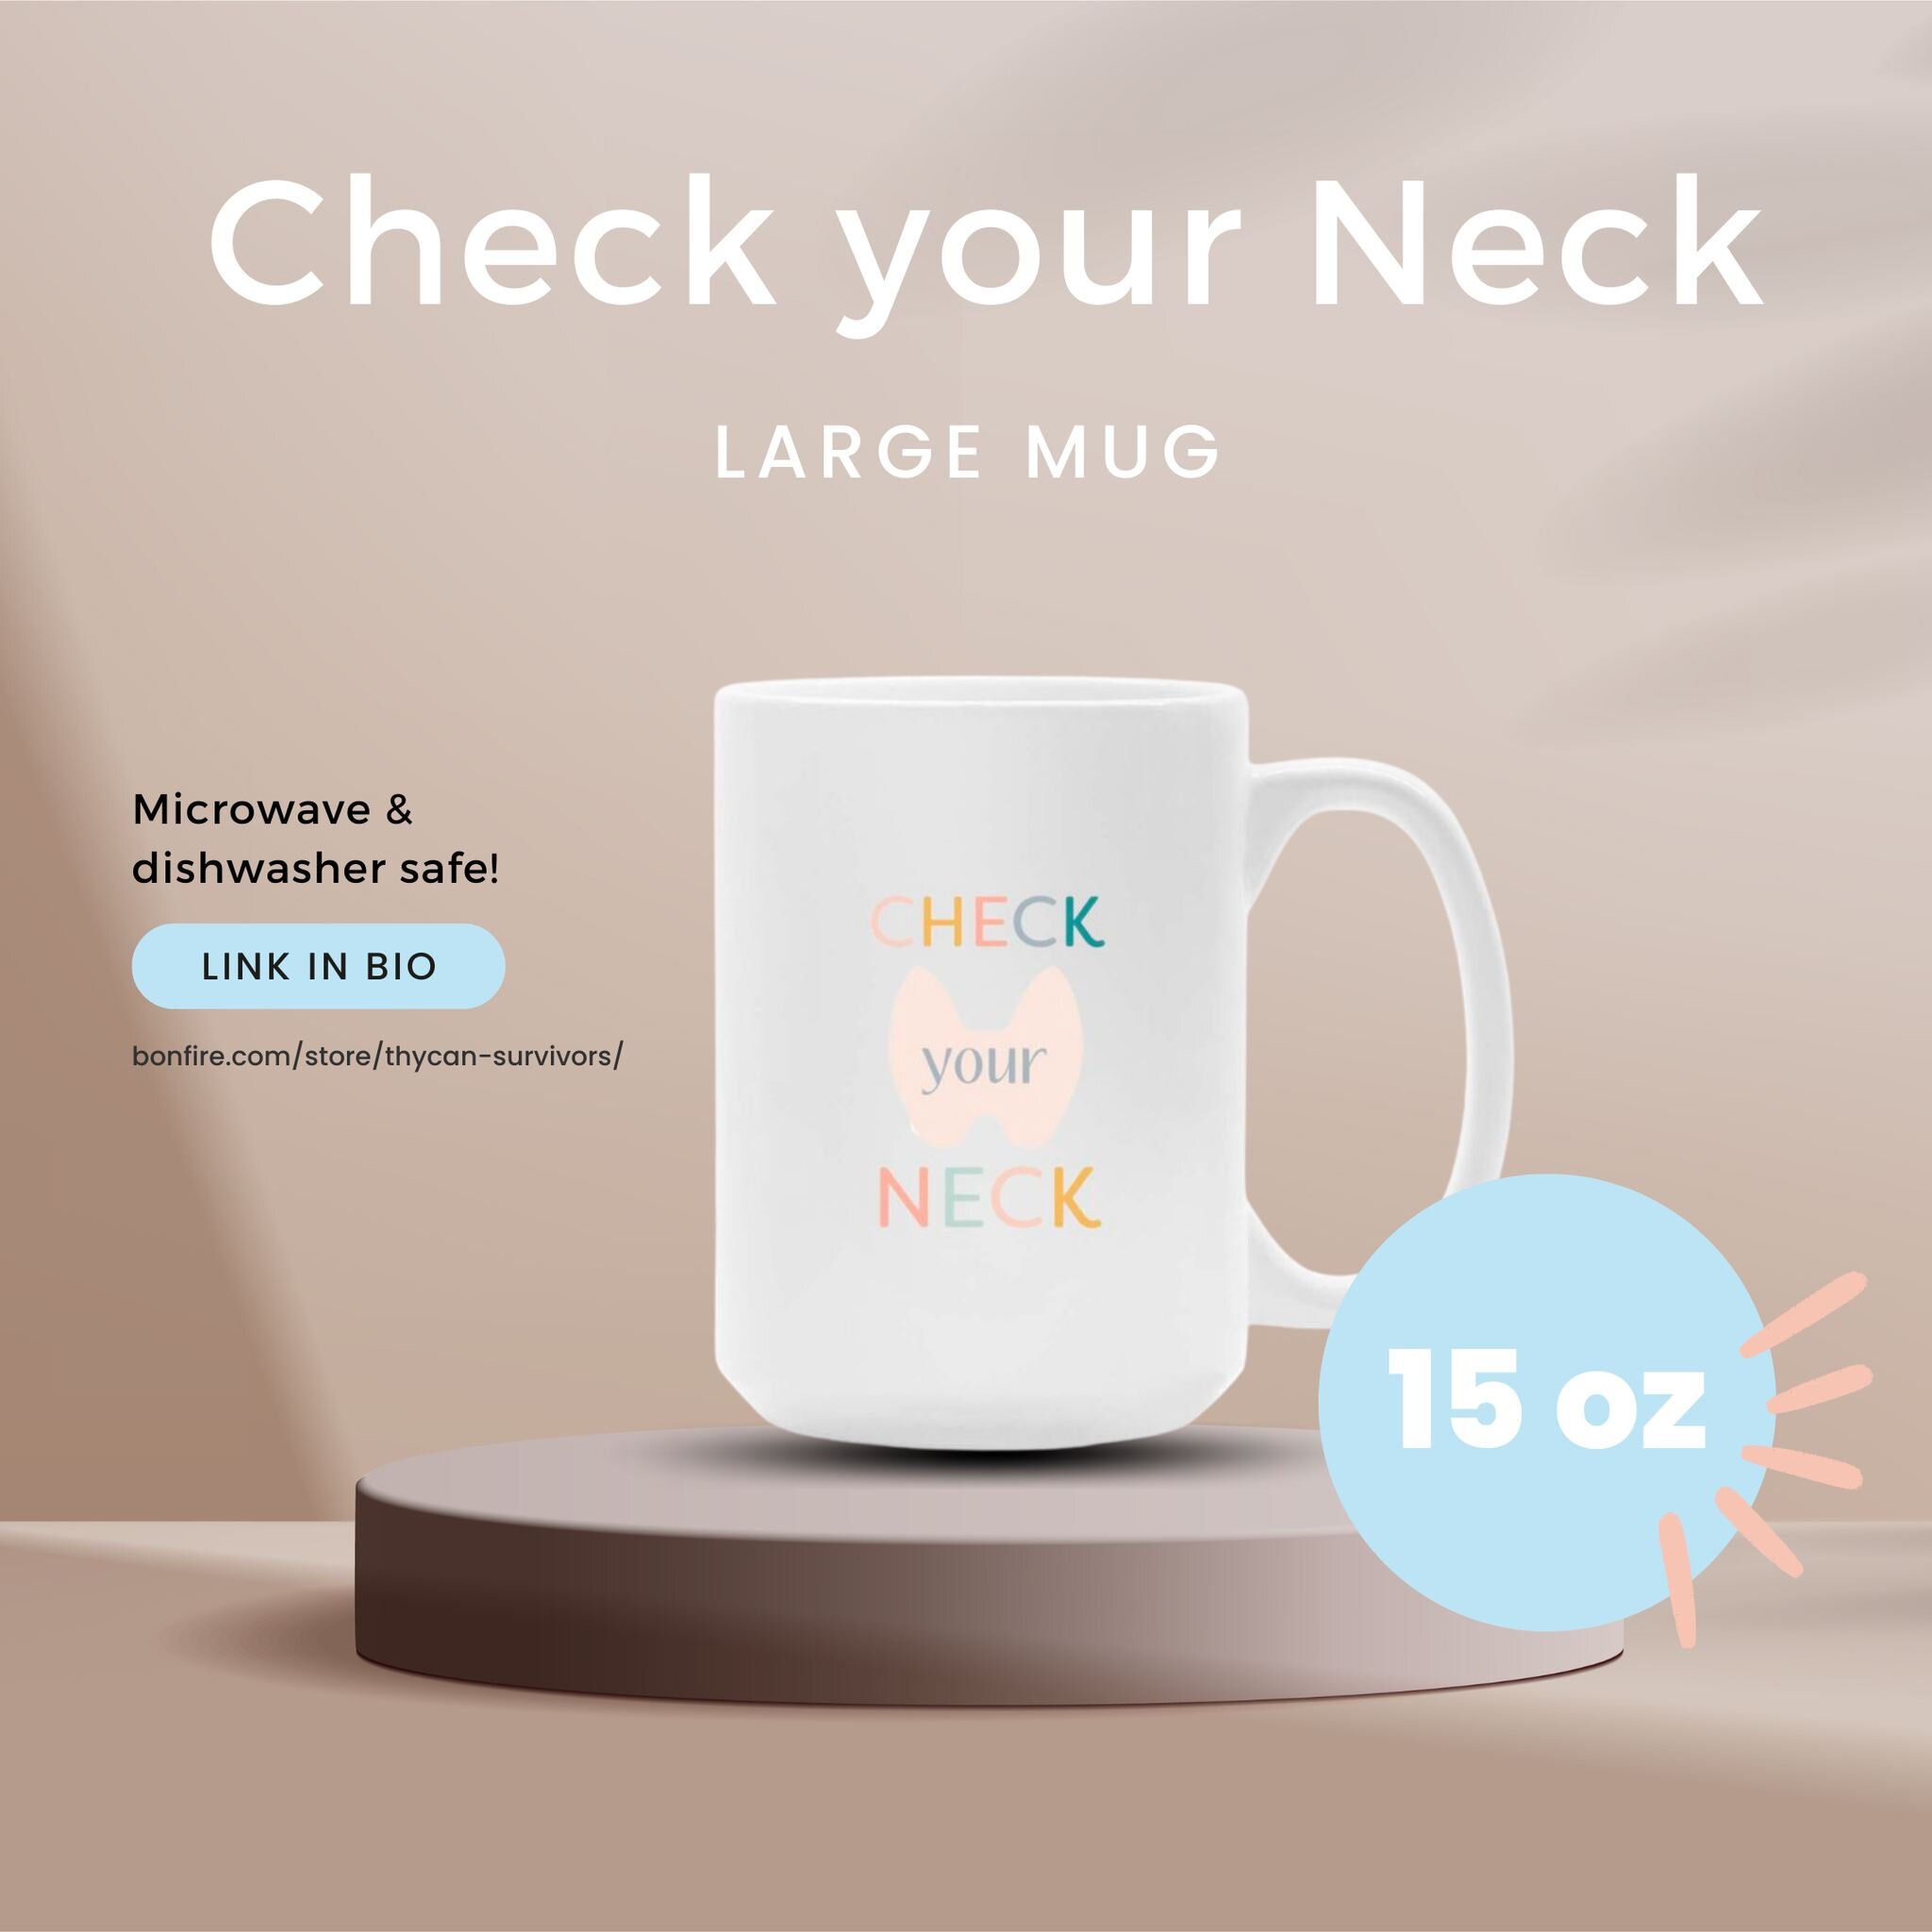 I think it's safe to say it's officially cozy season! 😊 Did you know we have a 15 oz big boy mug in our online shop?? Check it out at https://www.bonfire.com/rainbow-pastel-check-your-neck-mug/ 💙

#bonfire#wearebonfire#thyroidcancer#checkyourneck#n